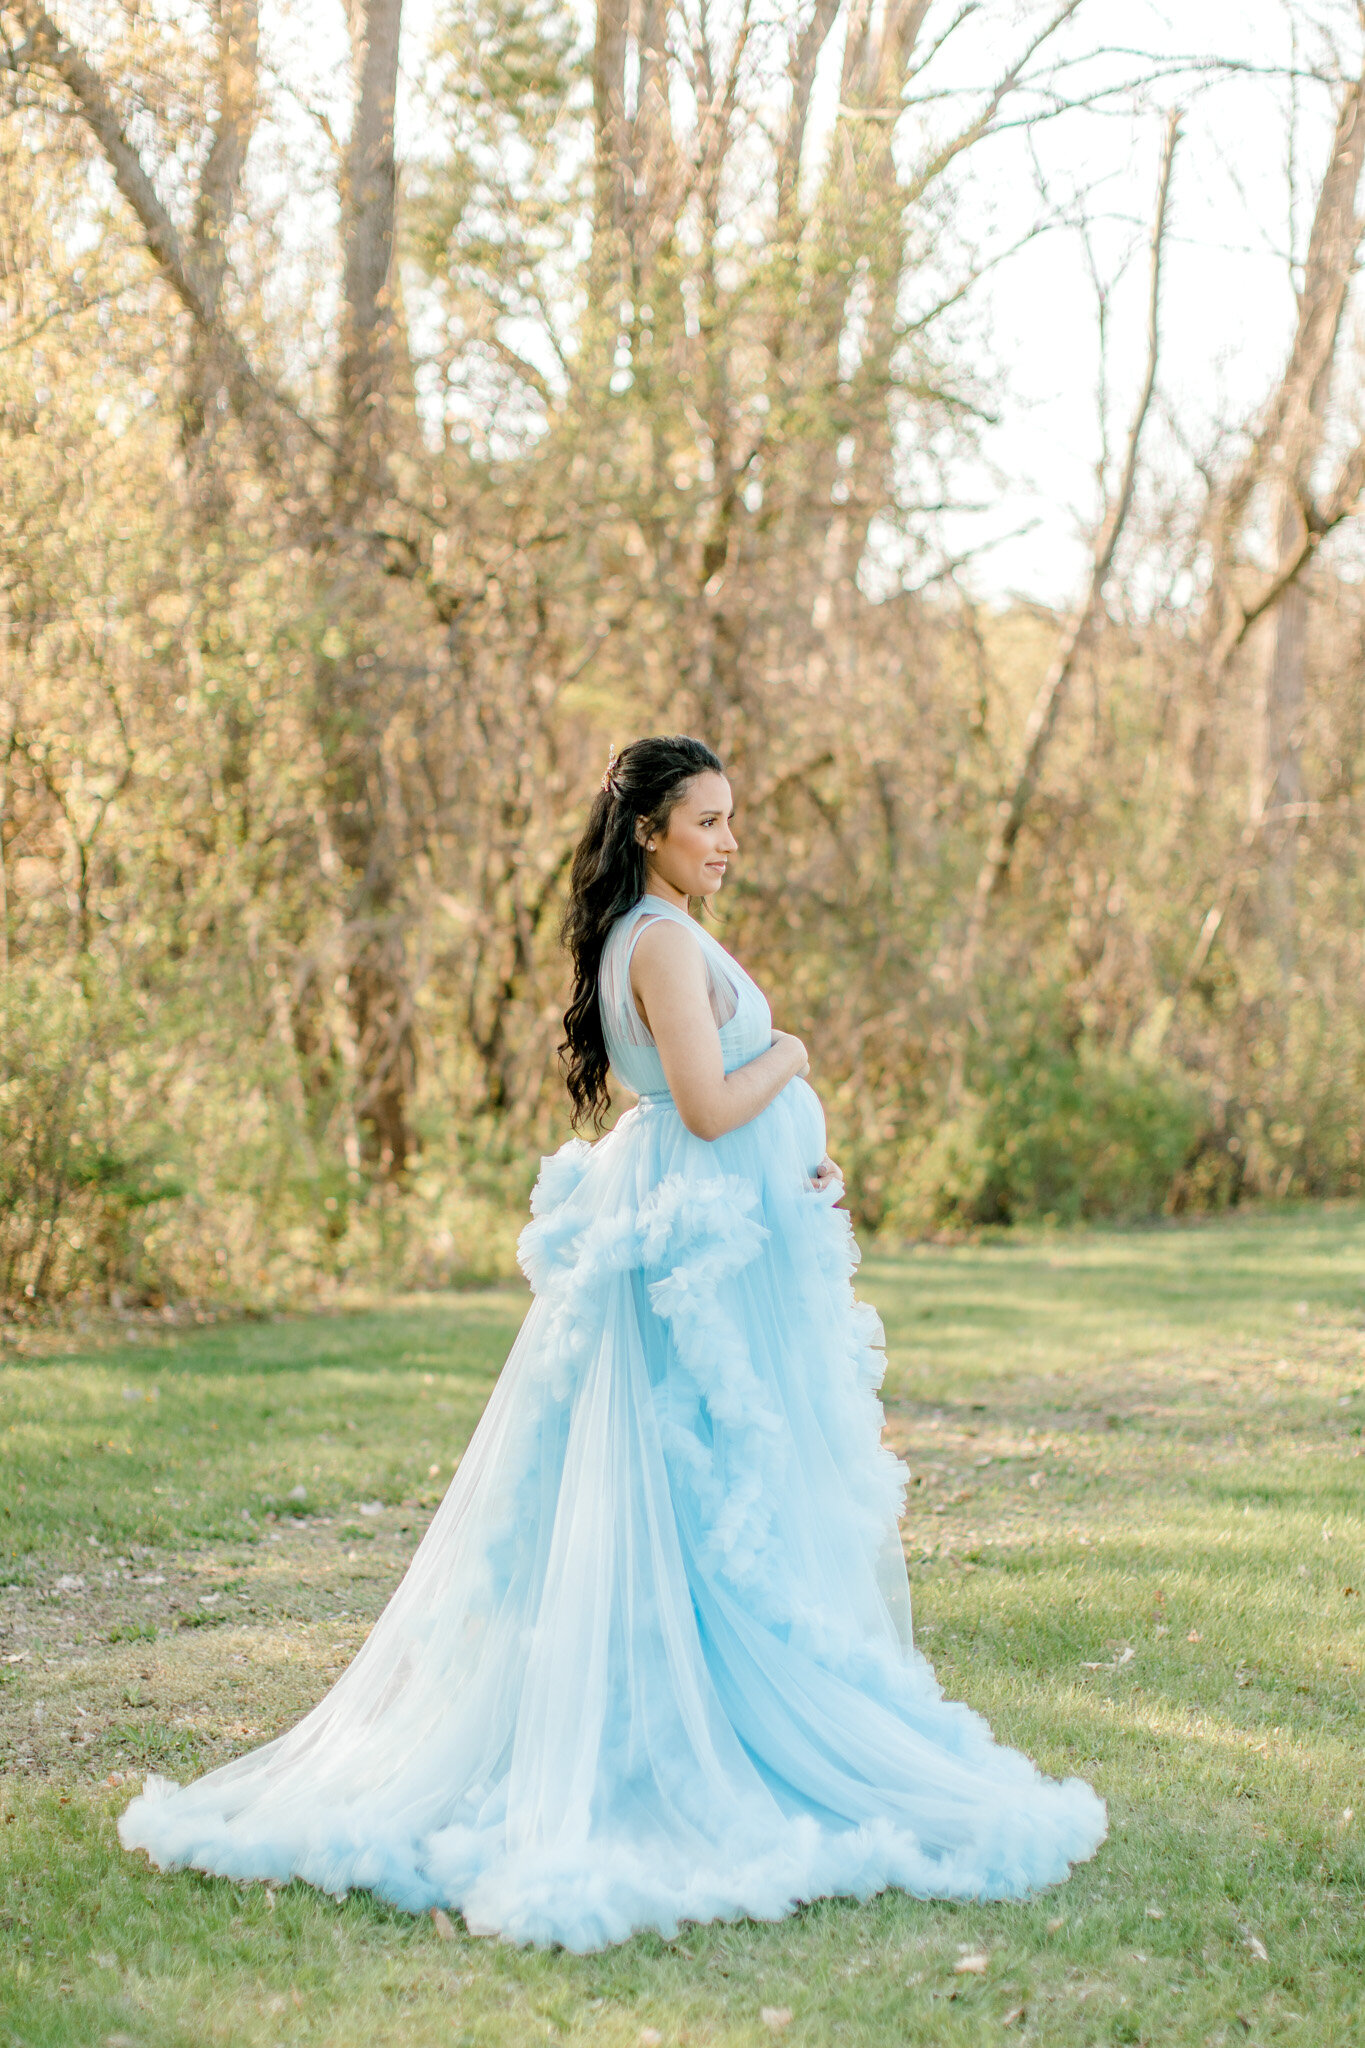 Spring Maternity Session in the Apple Blossoms | West Michigan Maternity Photographer